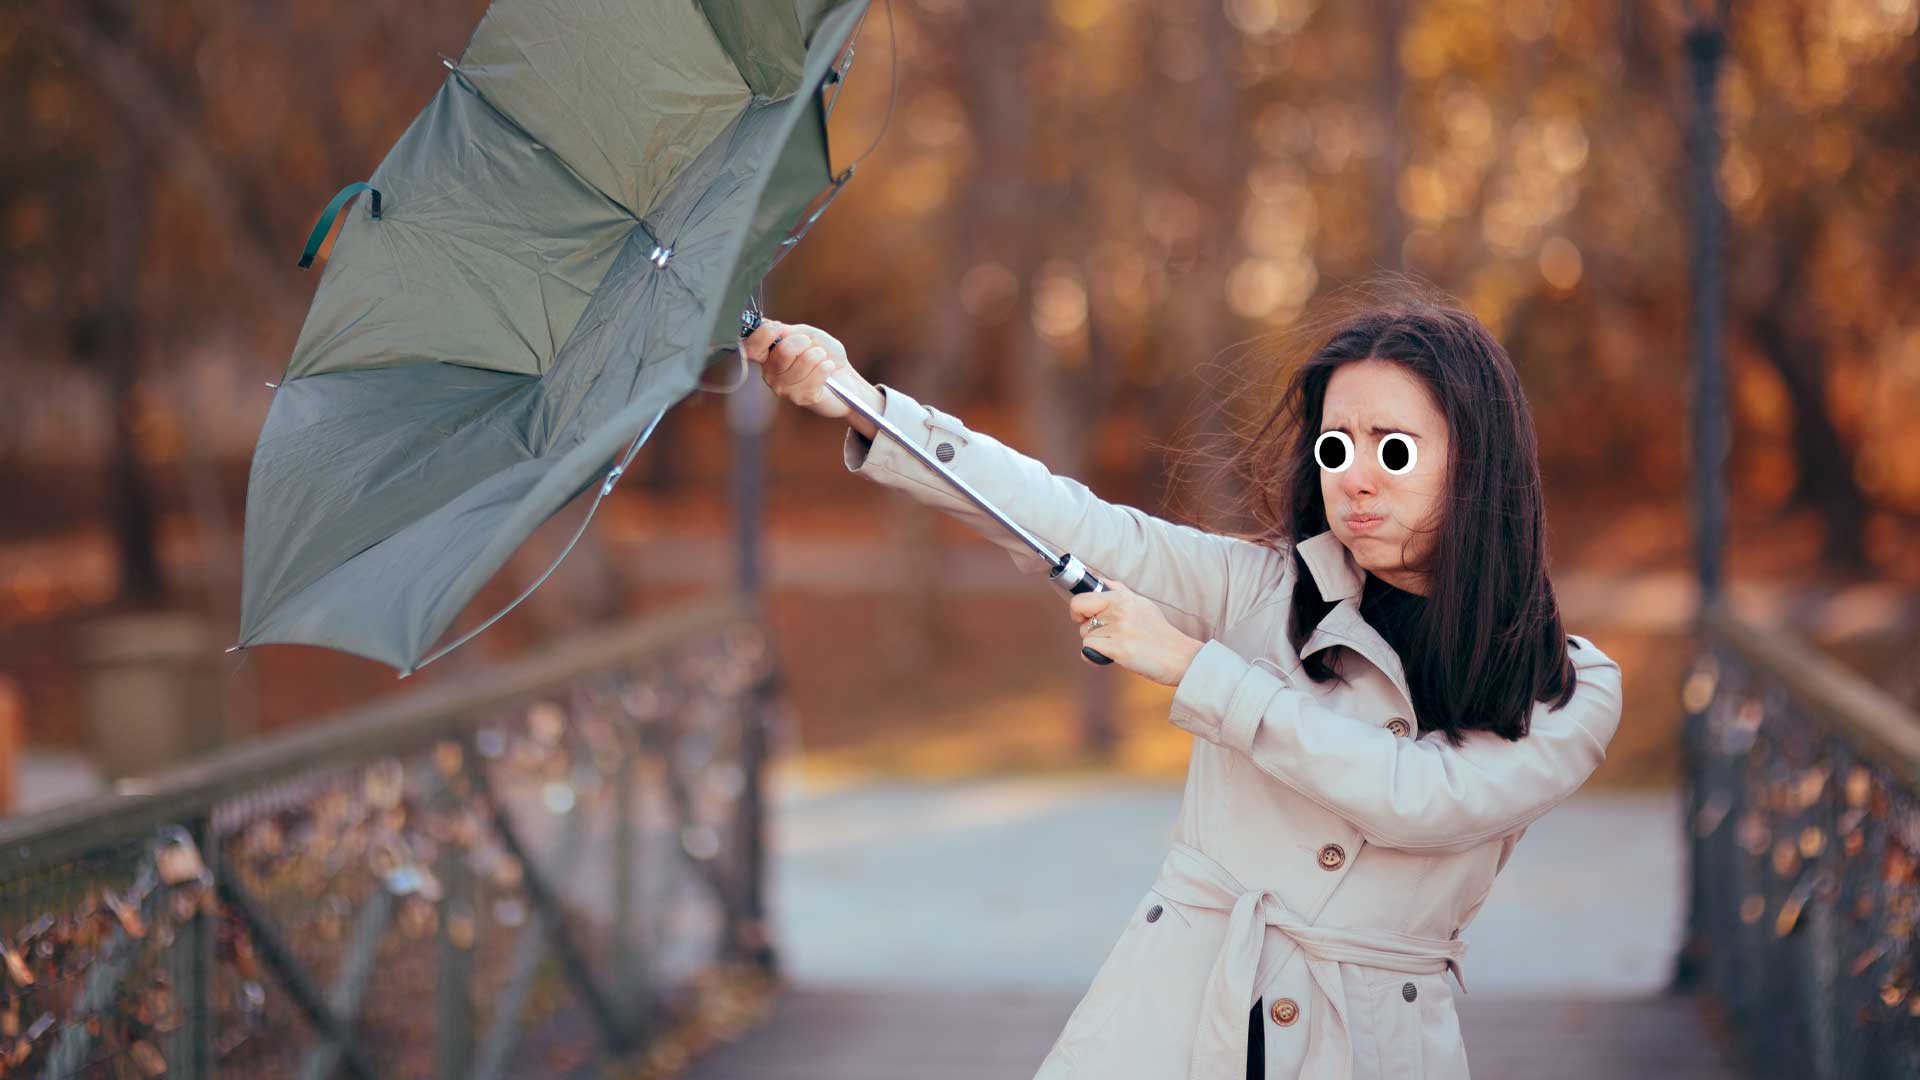 A person struggles to hold an umbrella up during a windy day